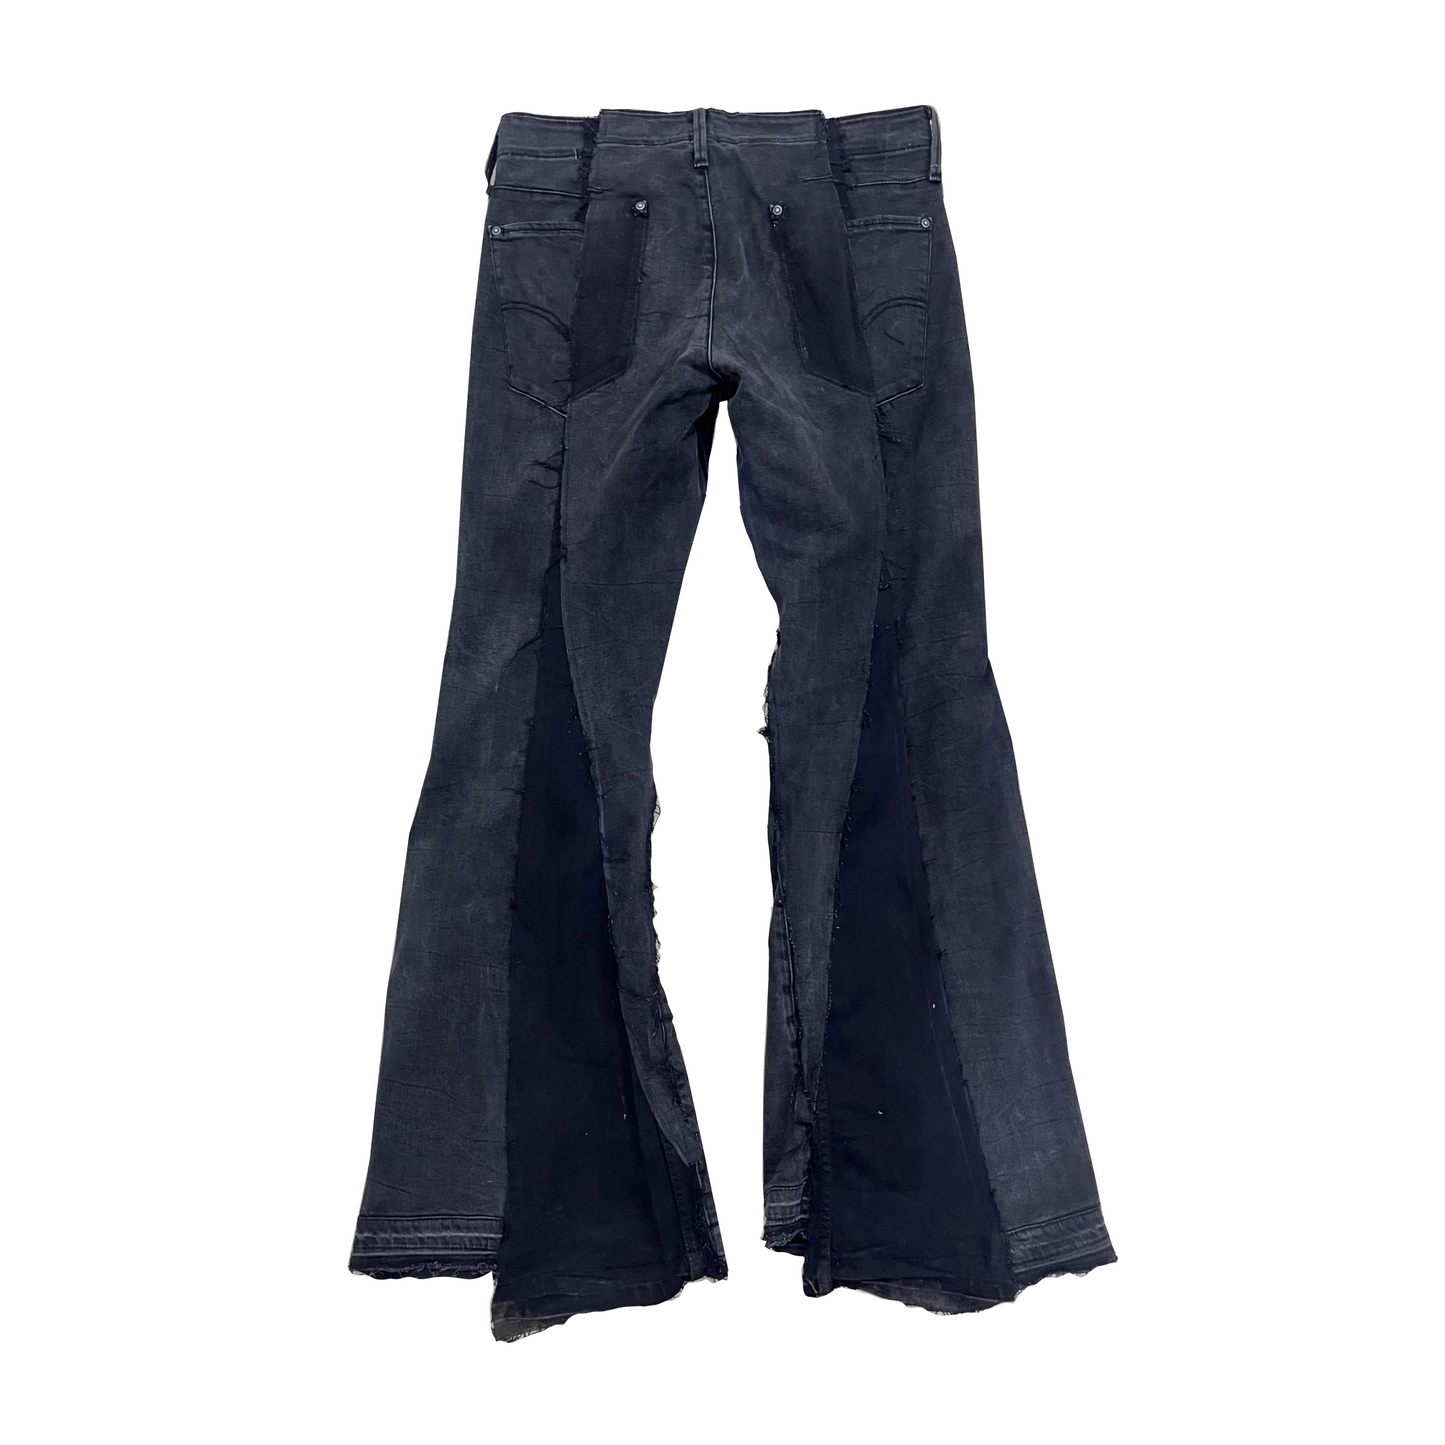 Asymmetrical Flared Reconstructed Distressed Jeans